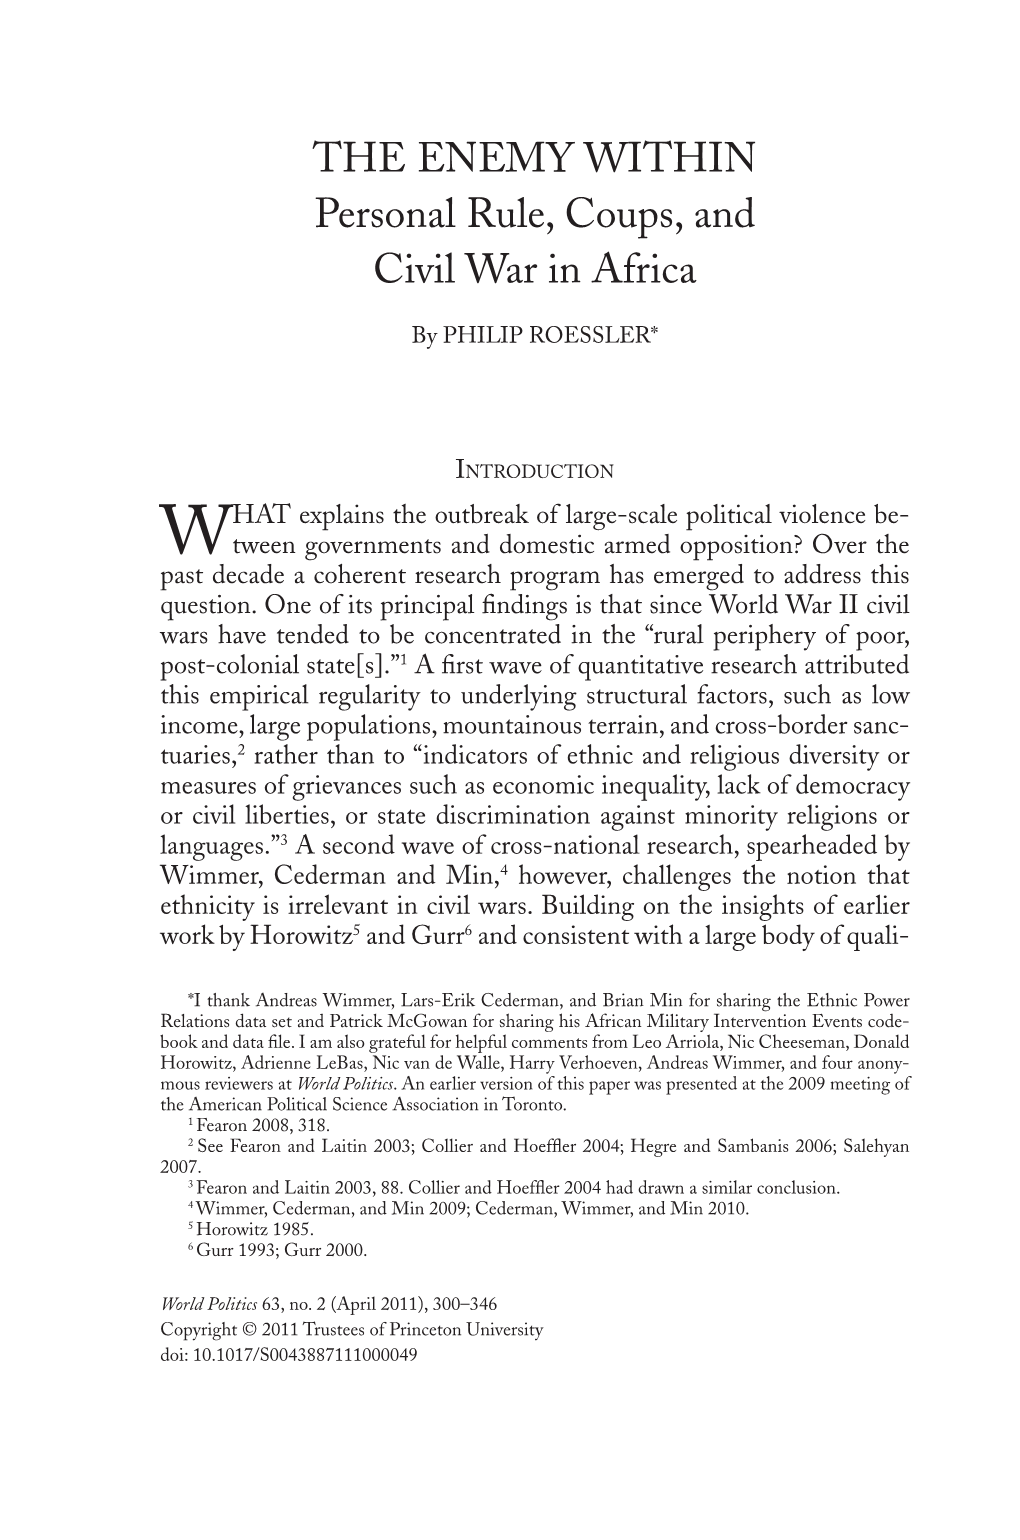 THE ENEMY WITHIN Personal Rule, Coups, and Civil War in Africa